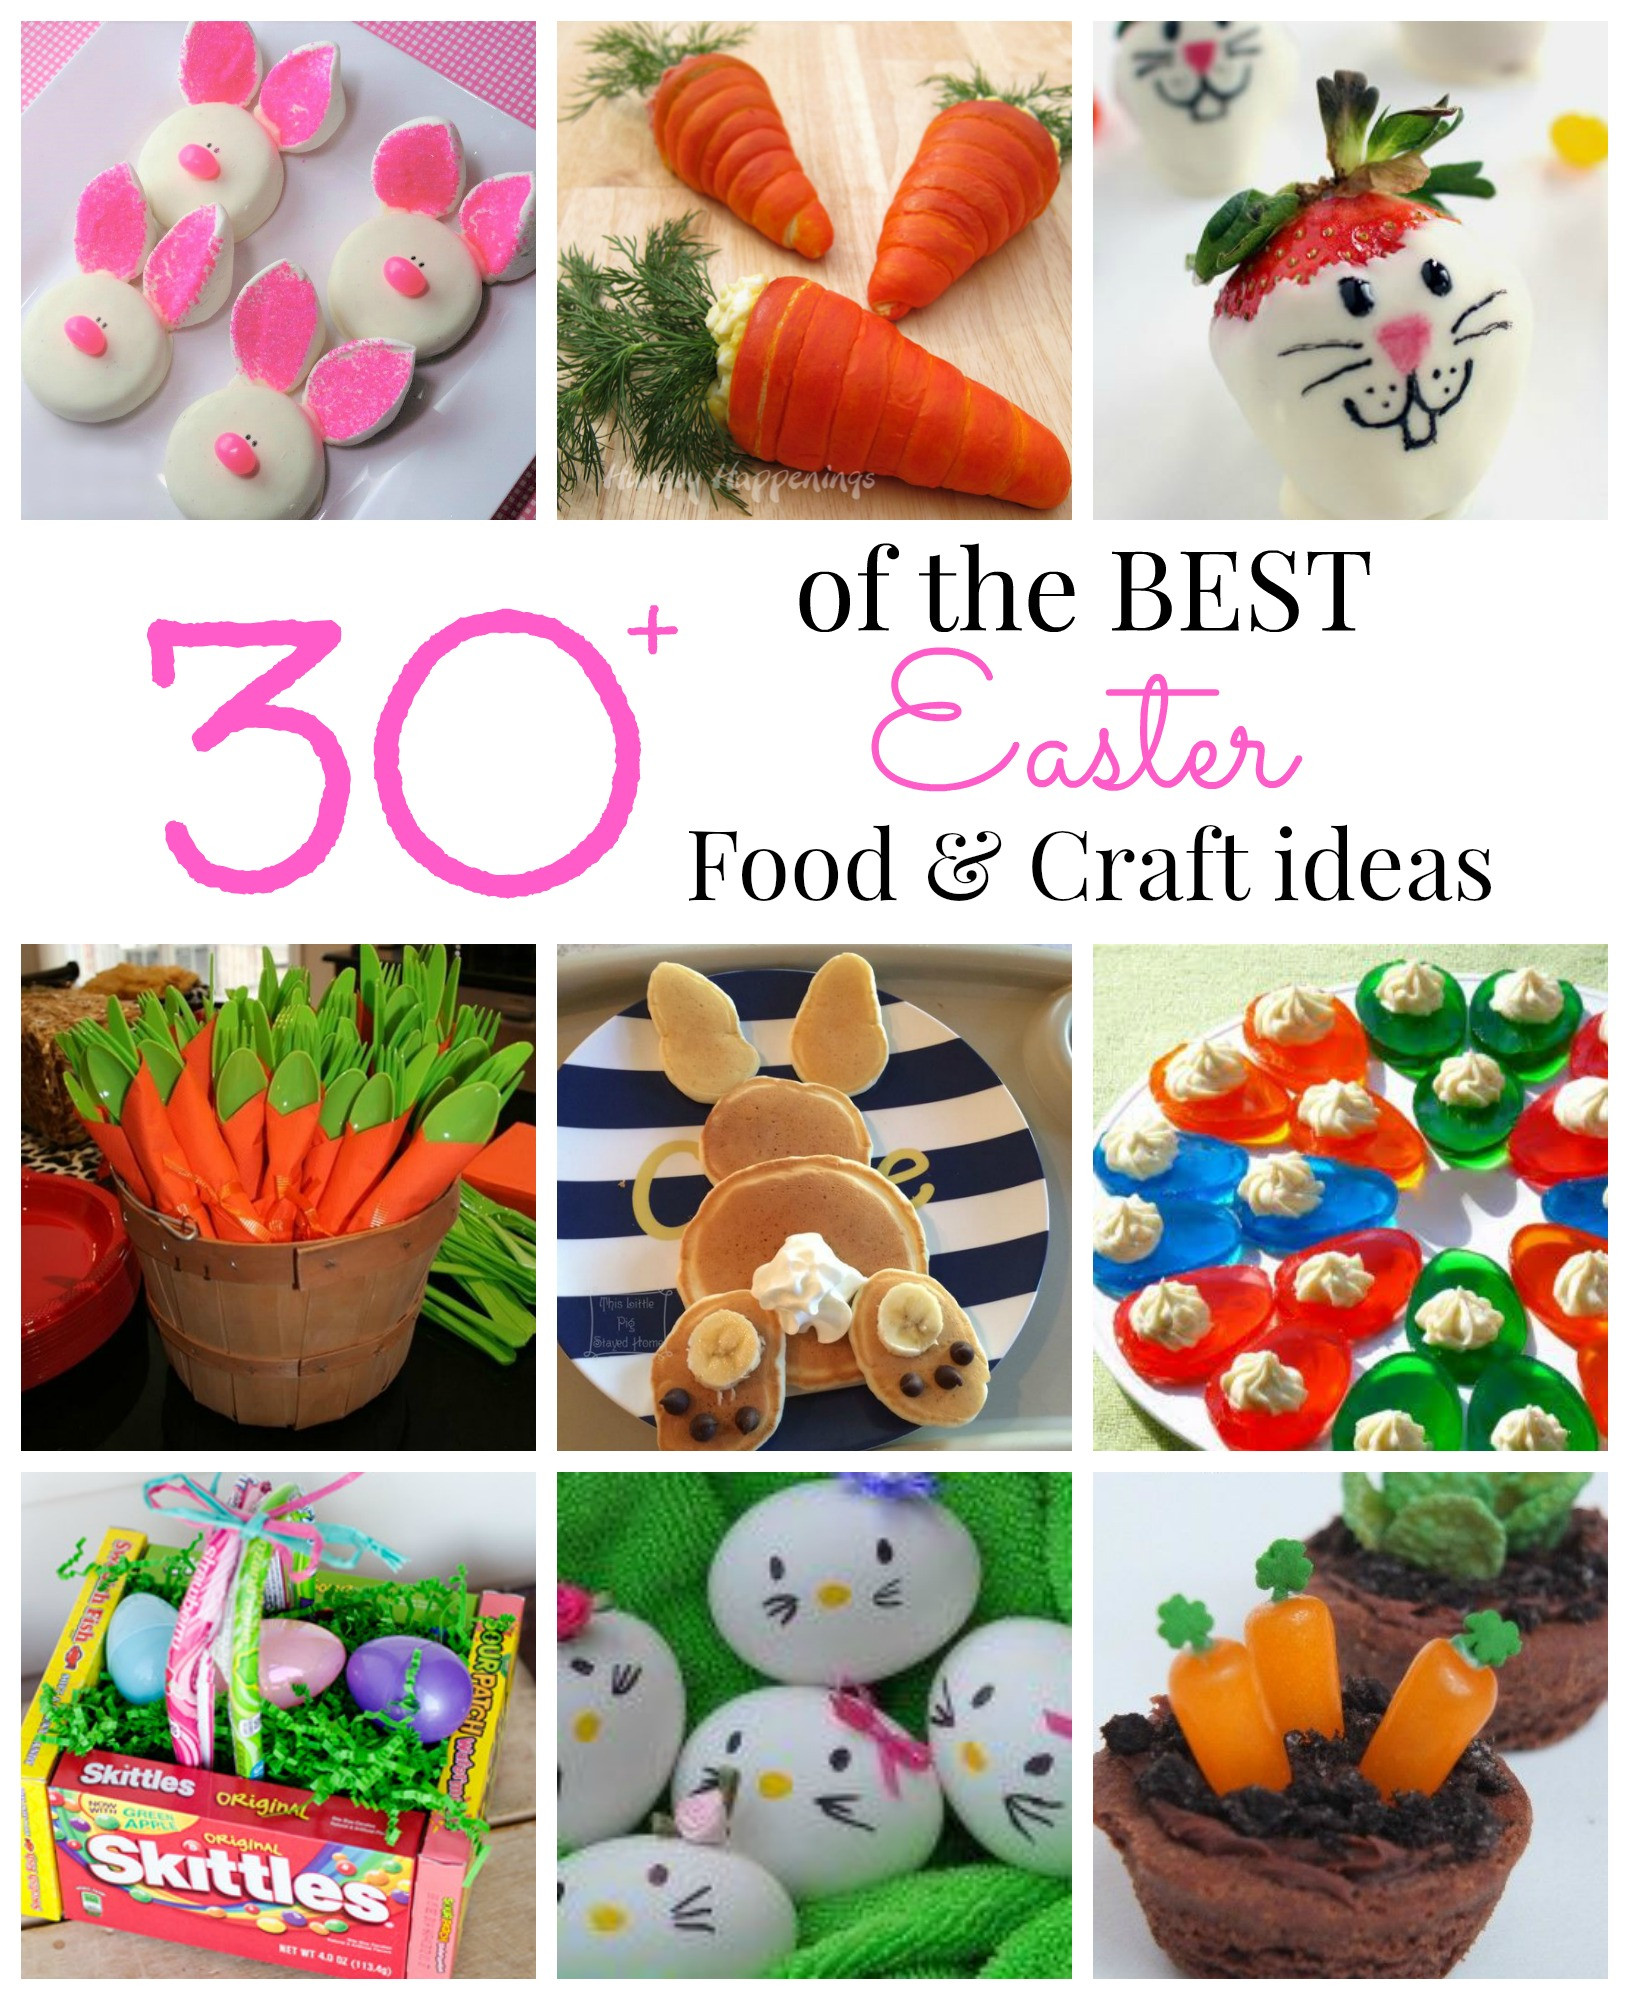 Easter Party Food Ideas Pinterest
 Best Food and Craft Ideas for Easter Party Pinching